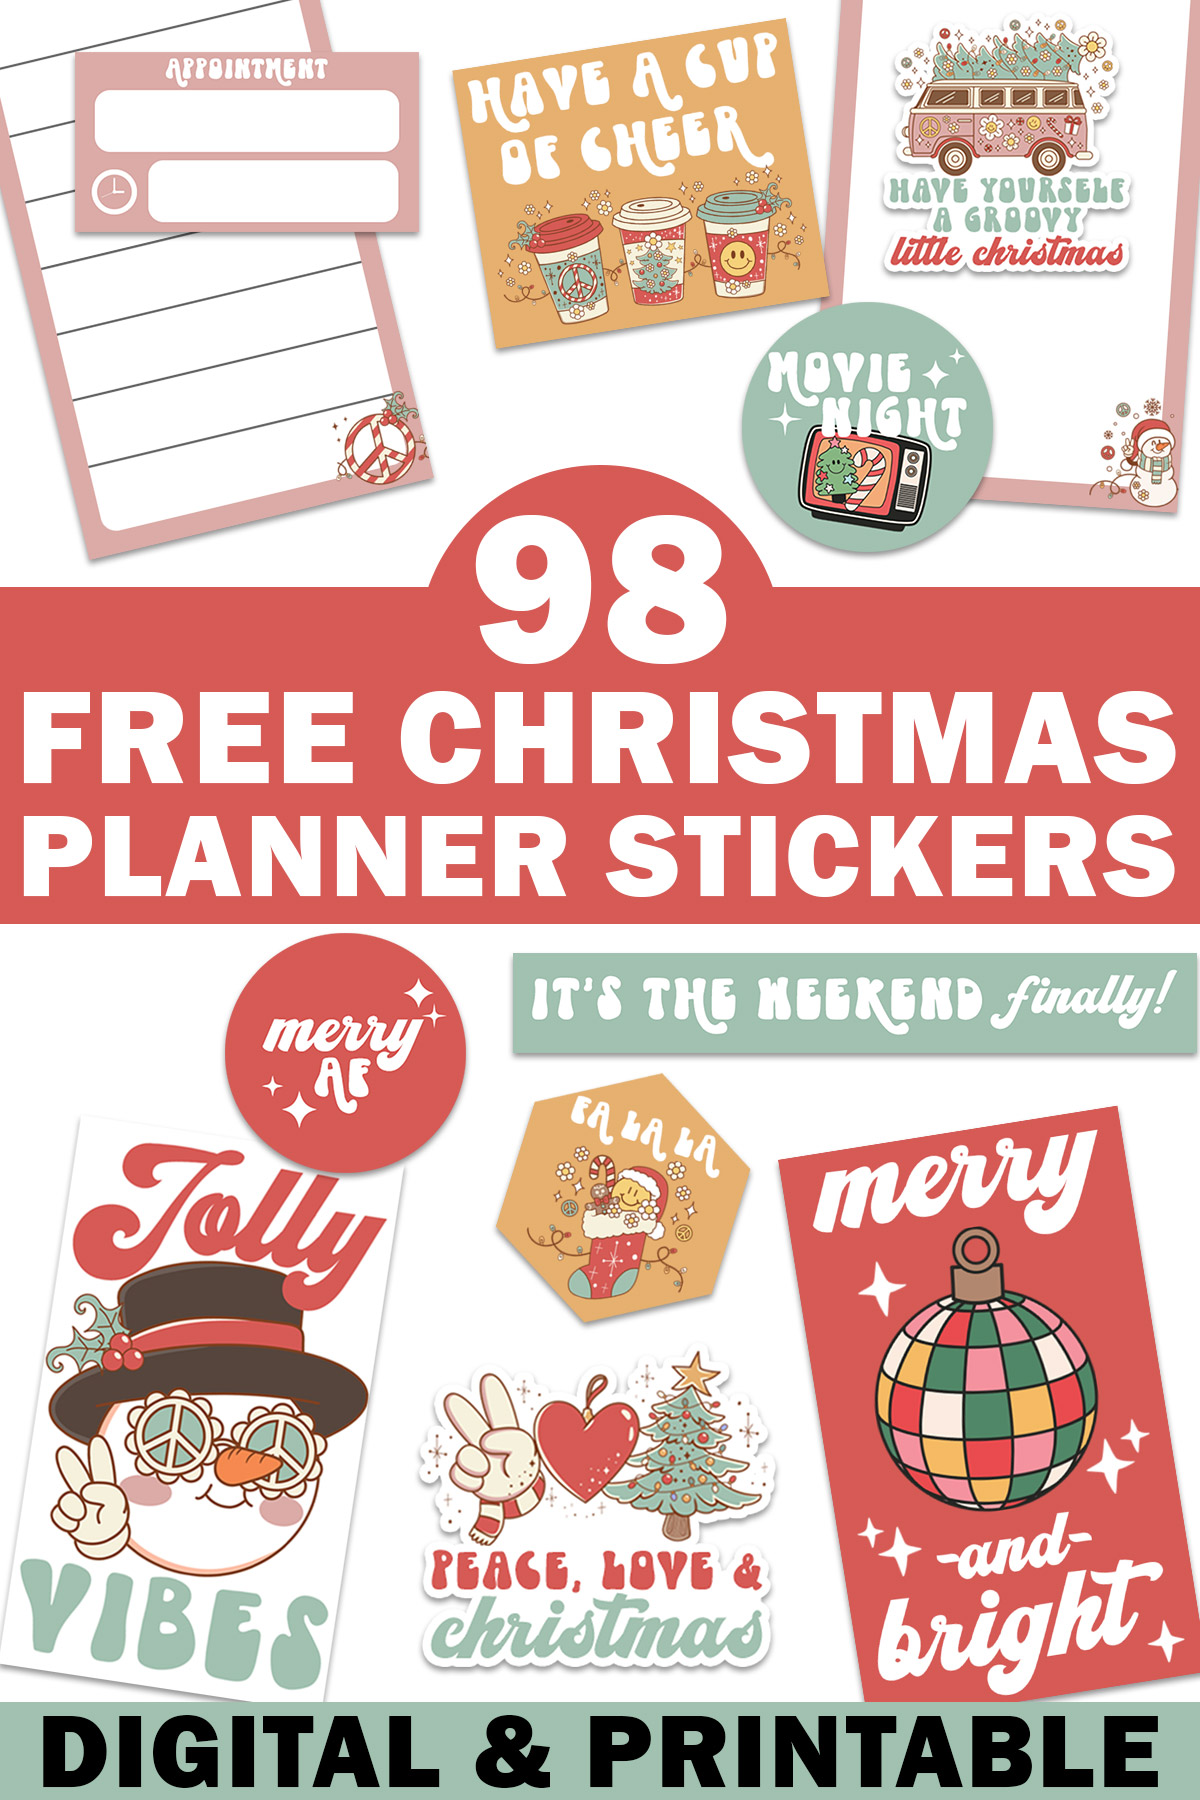 In the middle it says 98 free Christmas planner stickers. At the bottom it says digital & printable. Surrounding the words are some of the free digital Christmas planner stickers you can get at the end of this blog post.